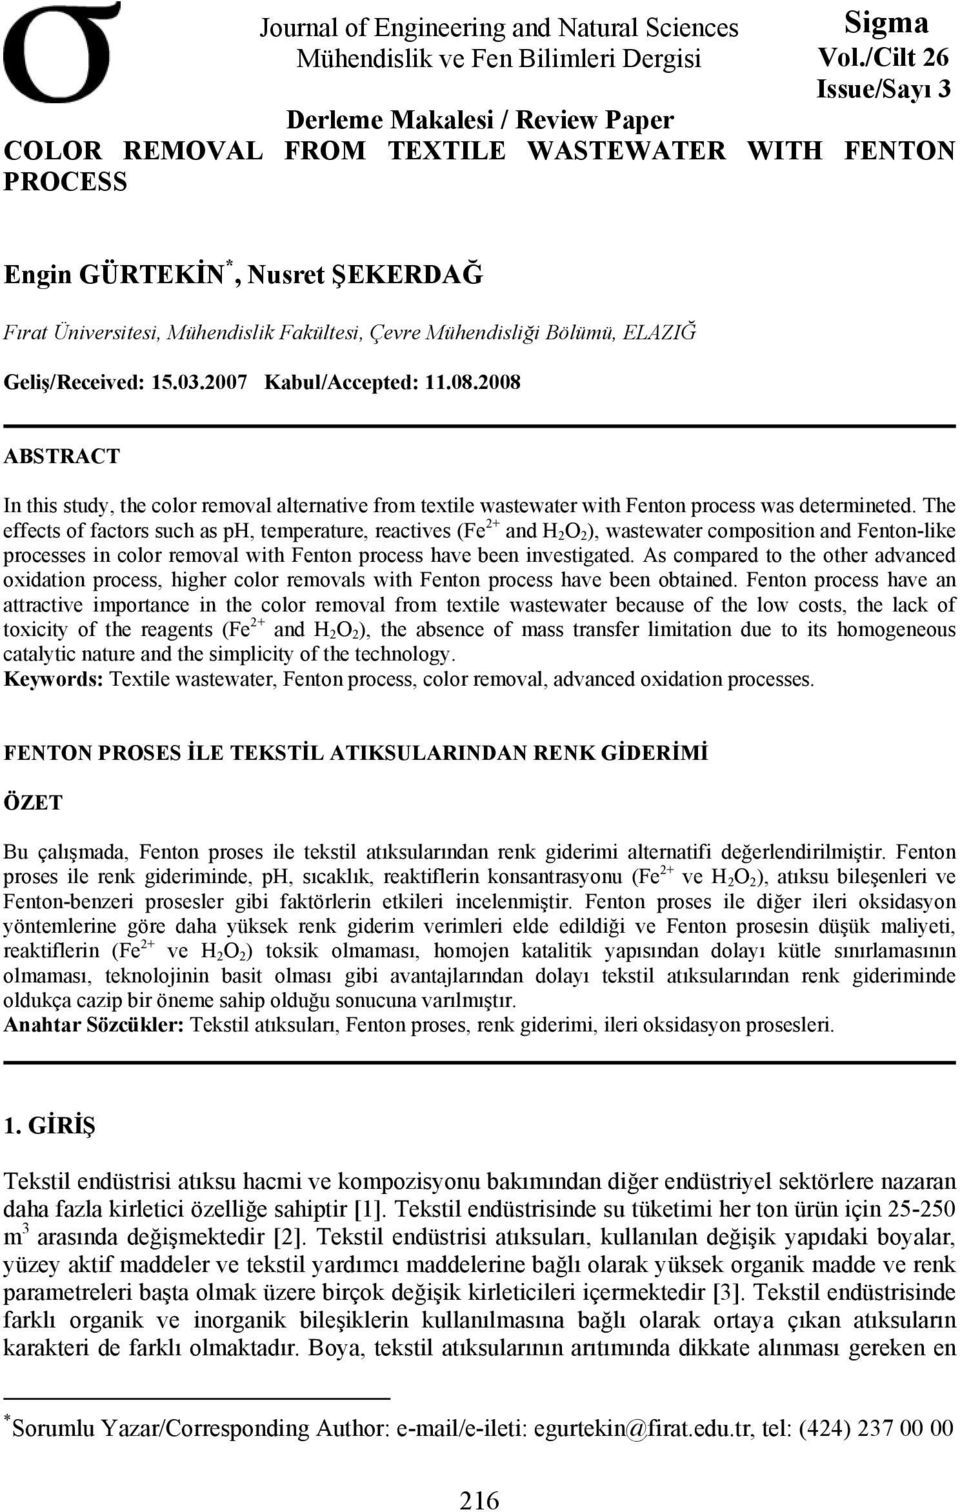 Mühendisliği Bölümü, ELAZIĞ Geliş/Received: 15.03.07 Kabul/Accepted: 11.08.08 ABSTRACT In this study, the color removal alternative from textile wastewater with process was determineted.